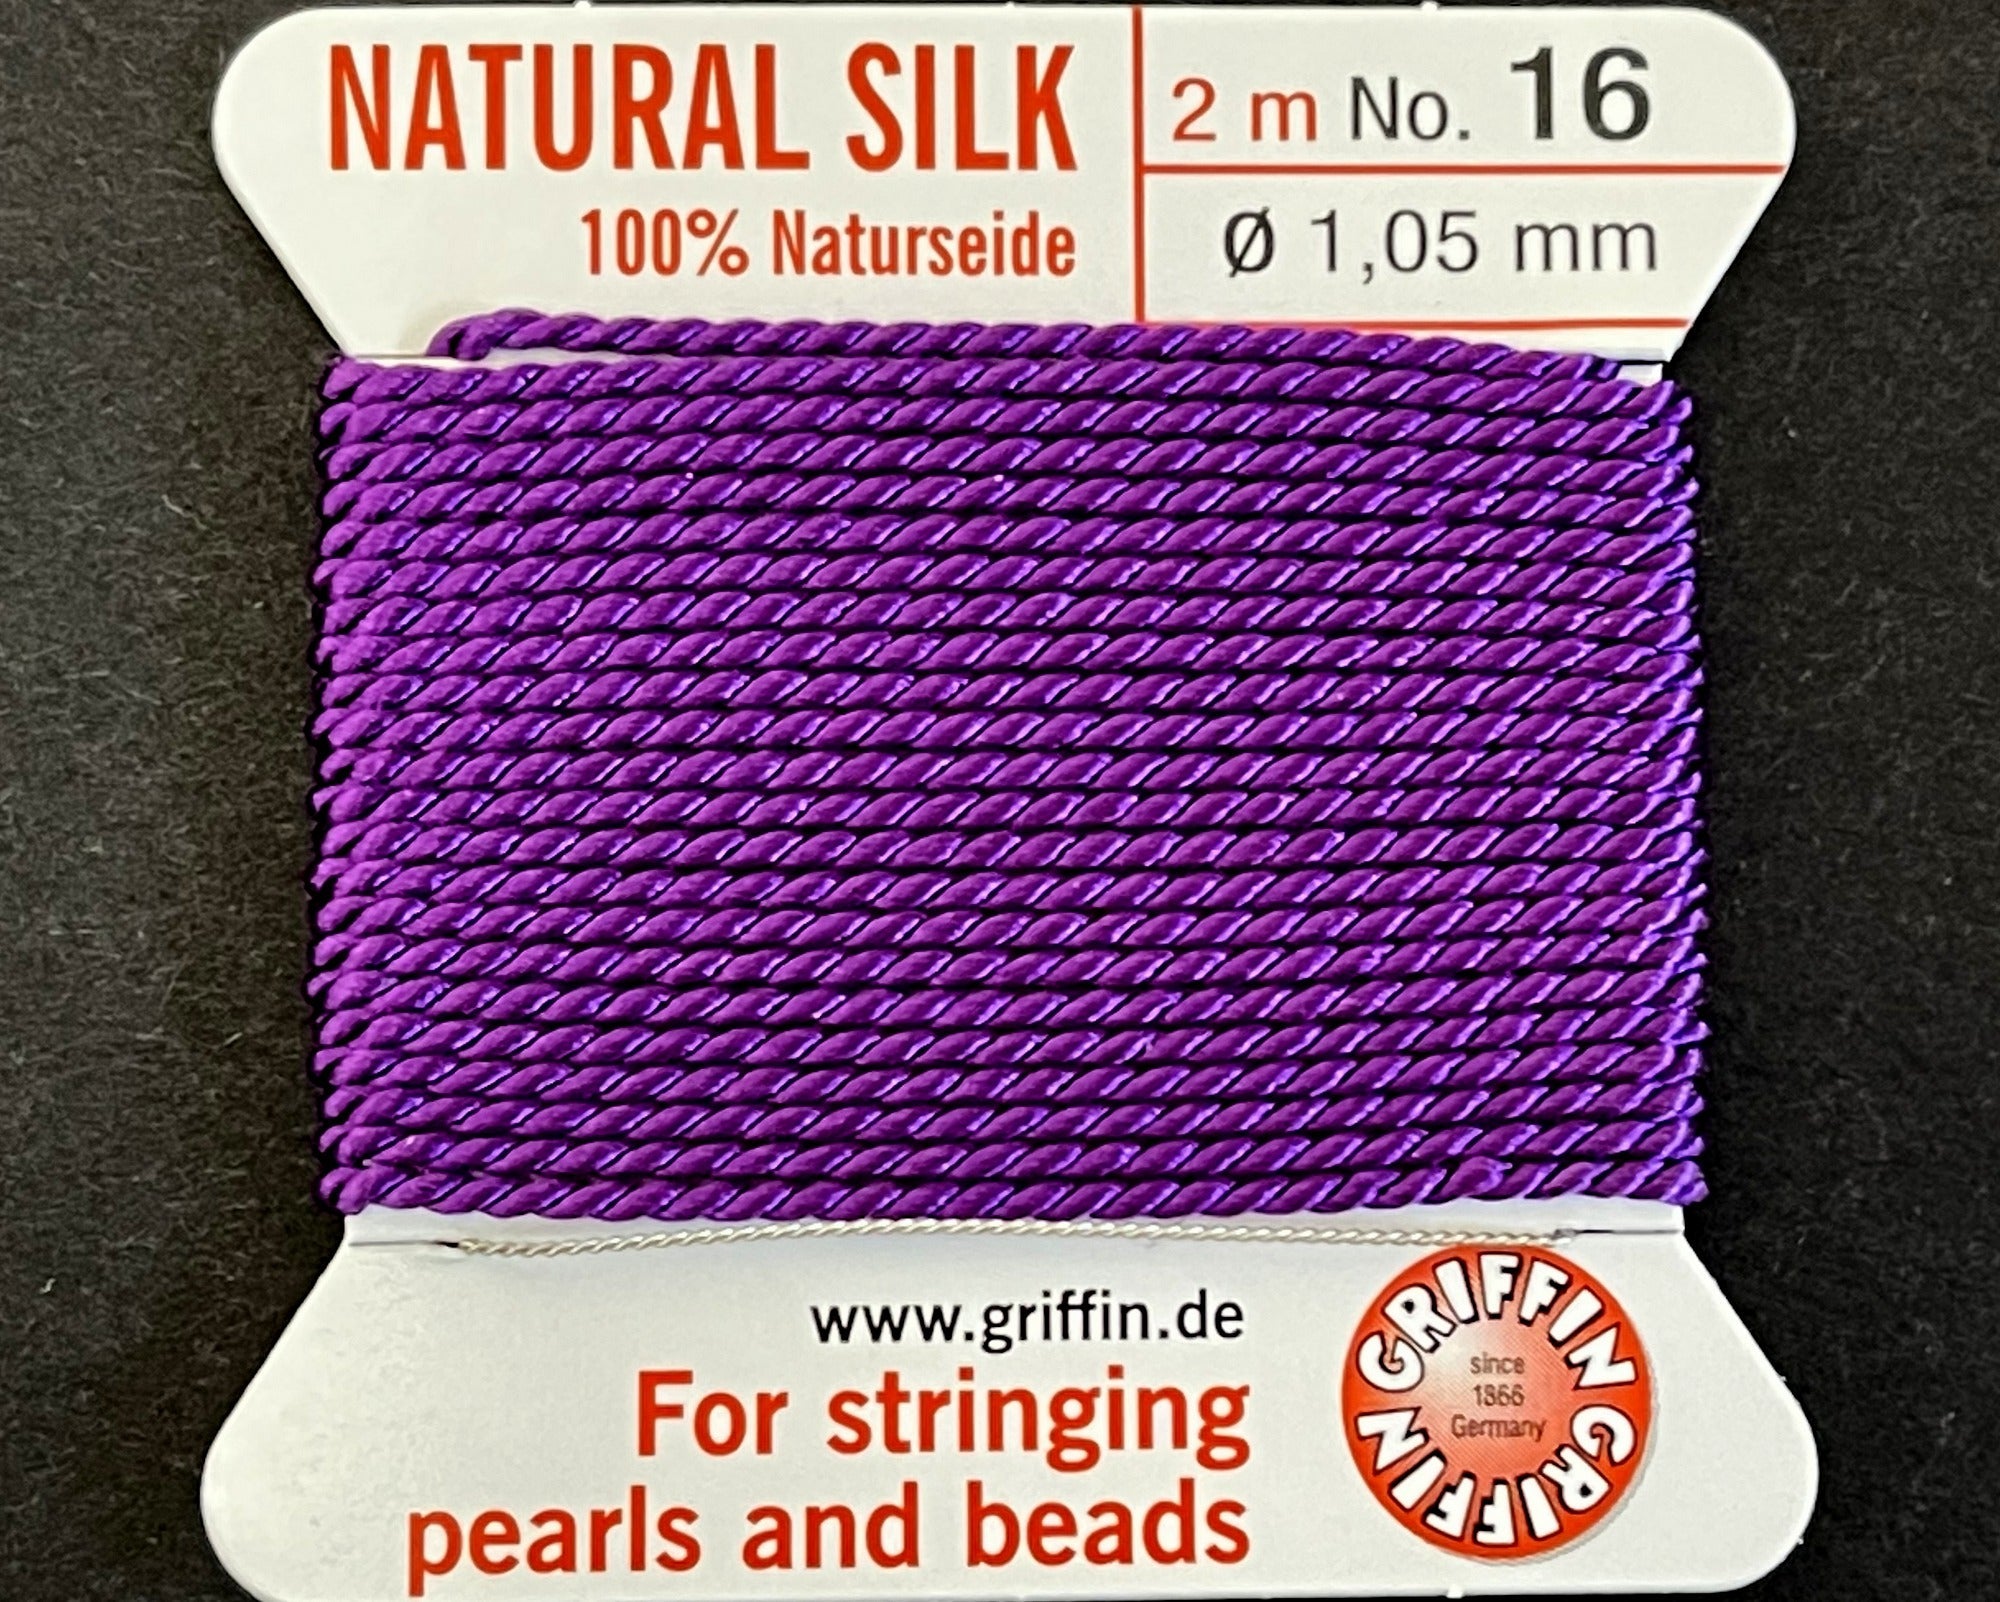 Griffin Silk beading cord with needle, size #16 - 1.05mm, 13 color choice, 2 meter - Oz Beads 